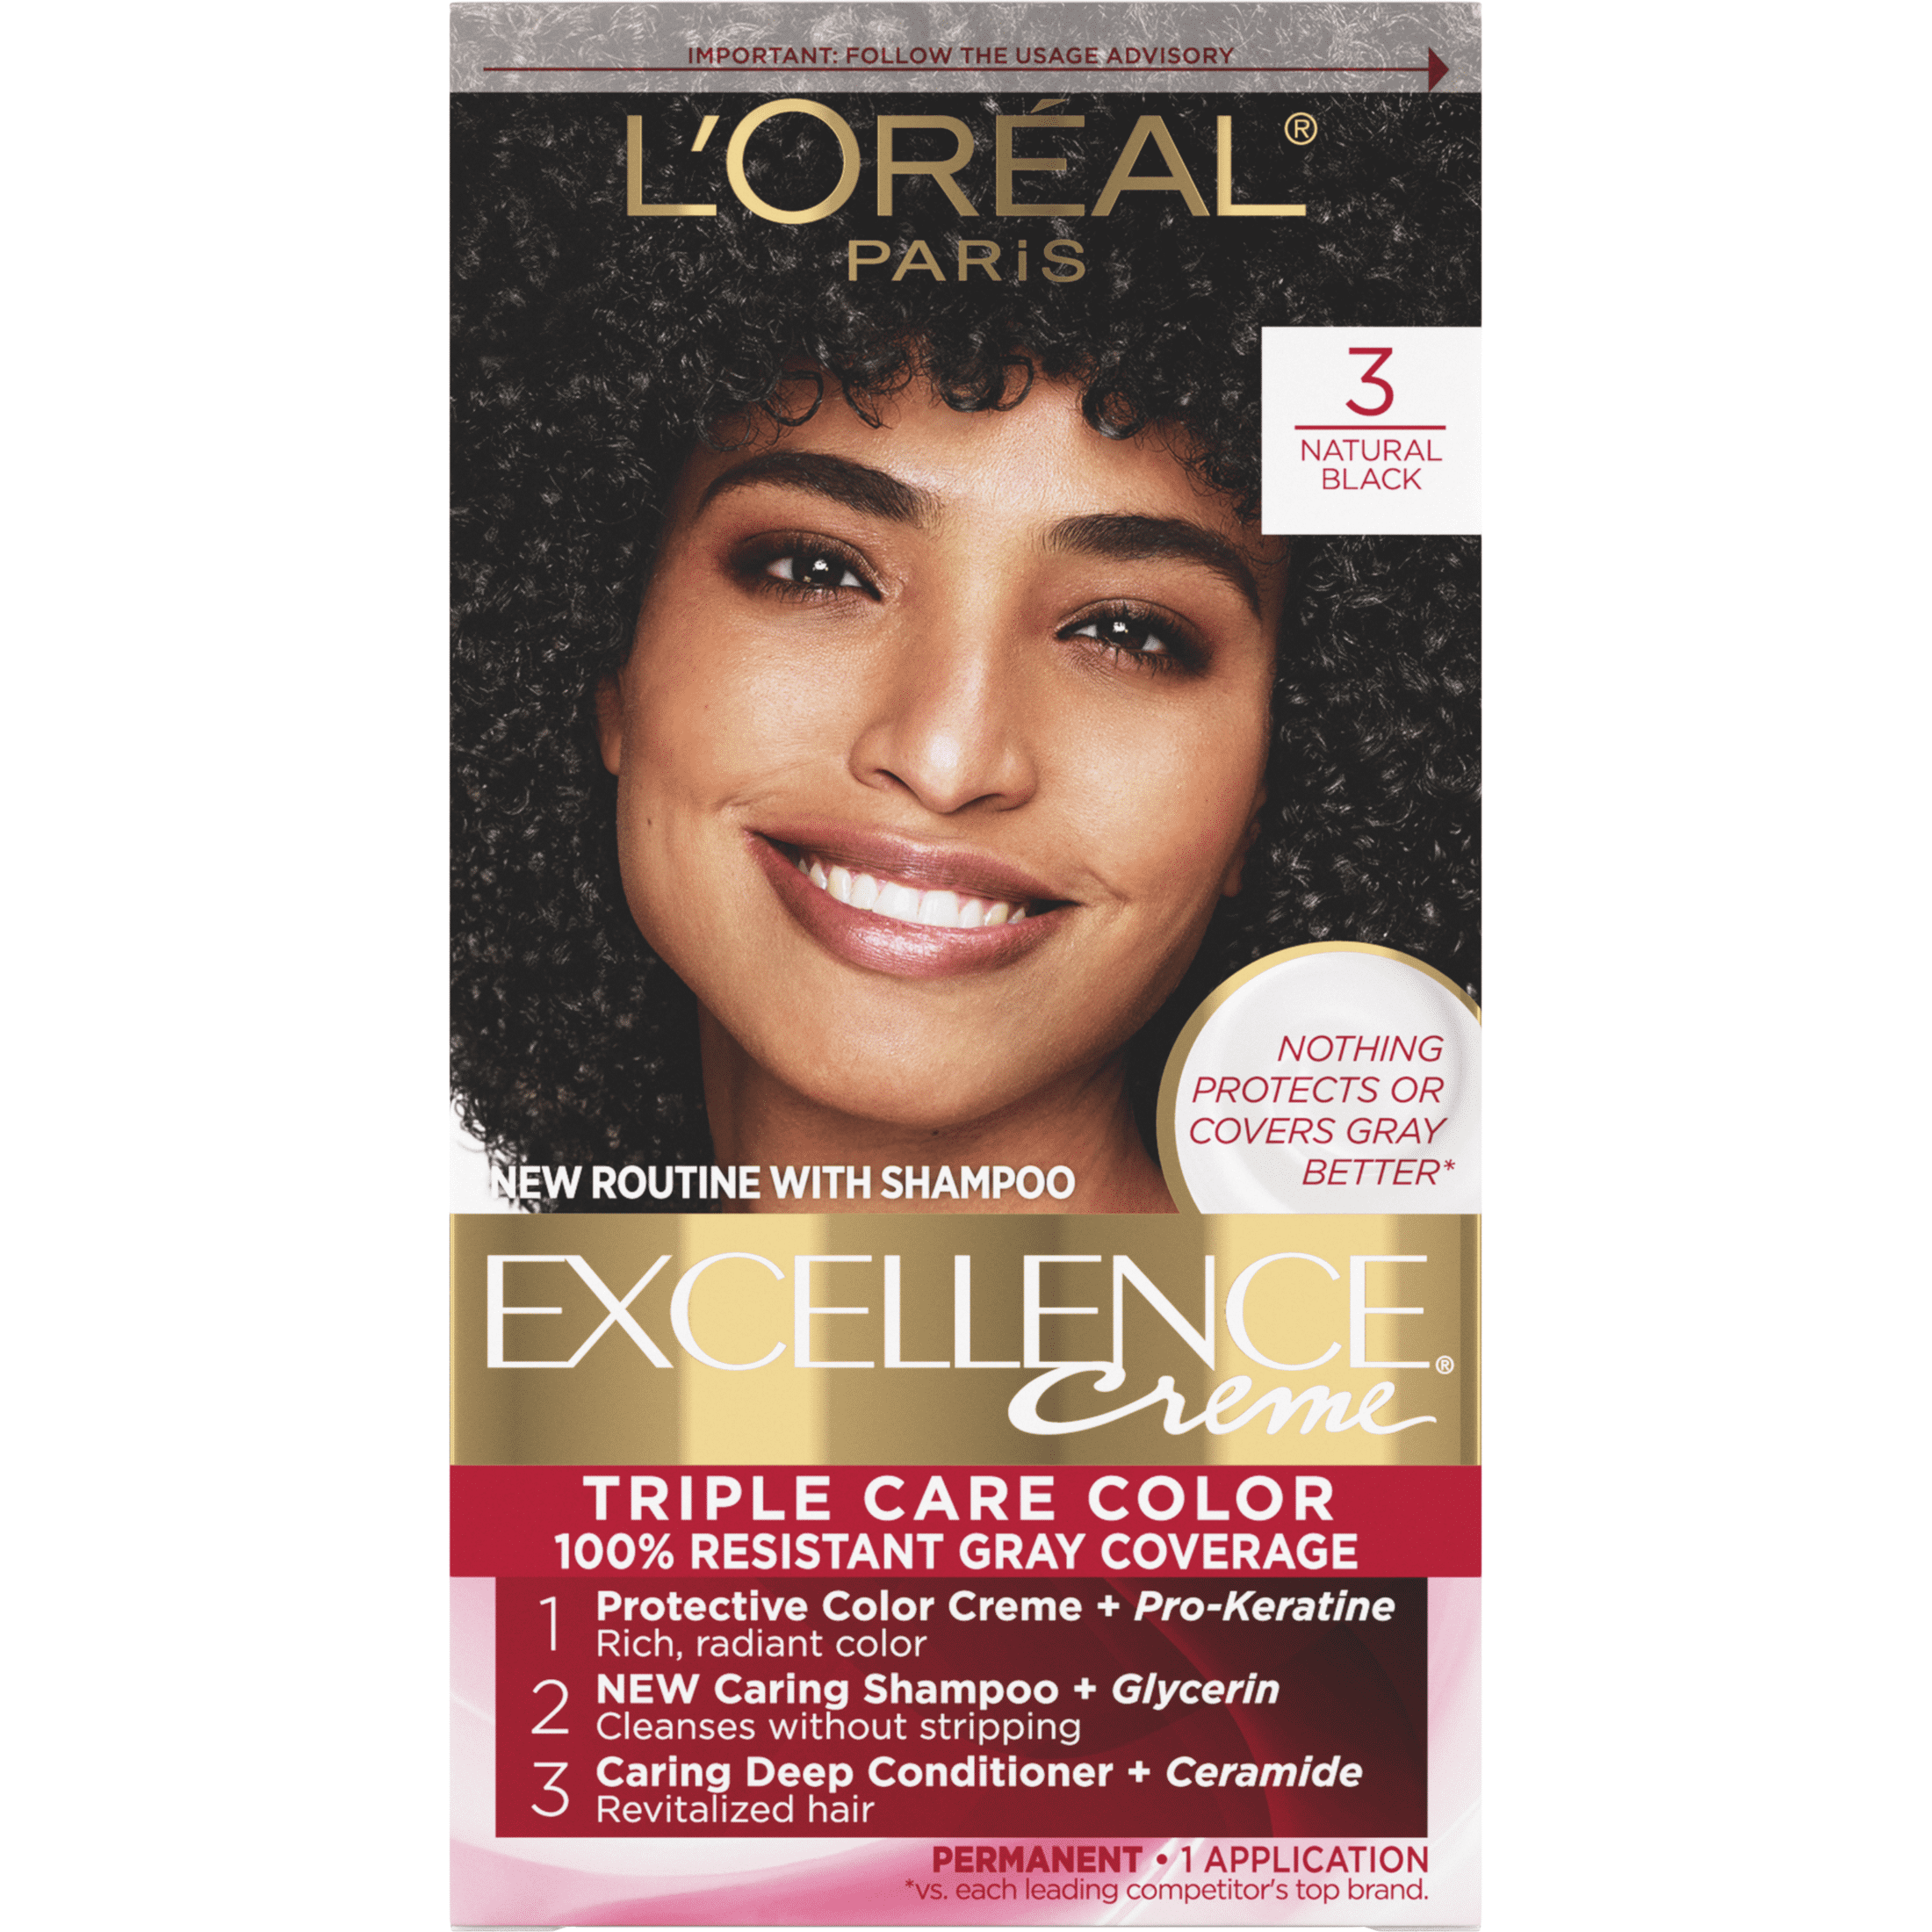 20 Hair Color Trends for Brunettes to Try in 2019  LOréal Paris